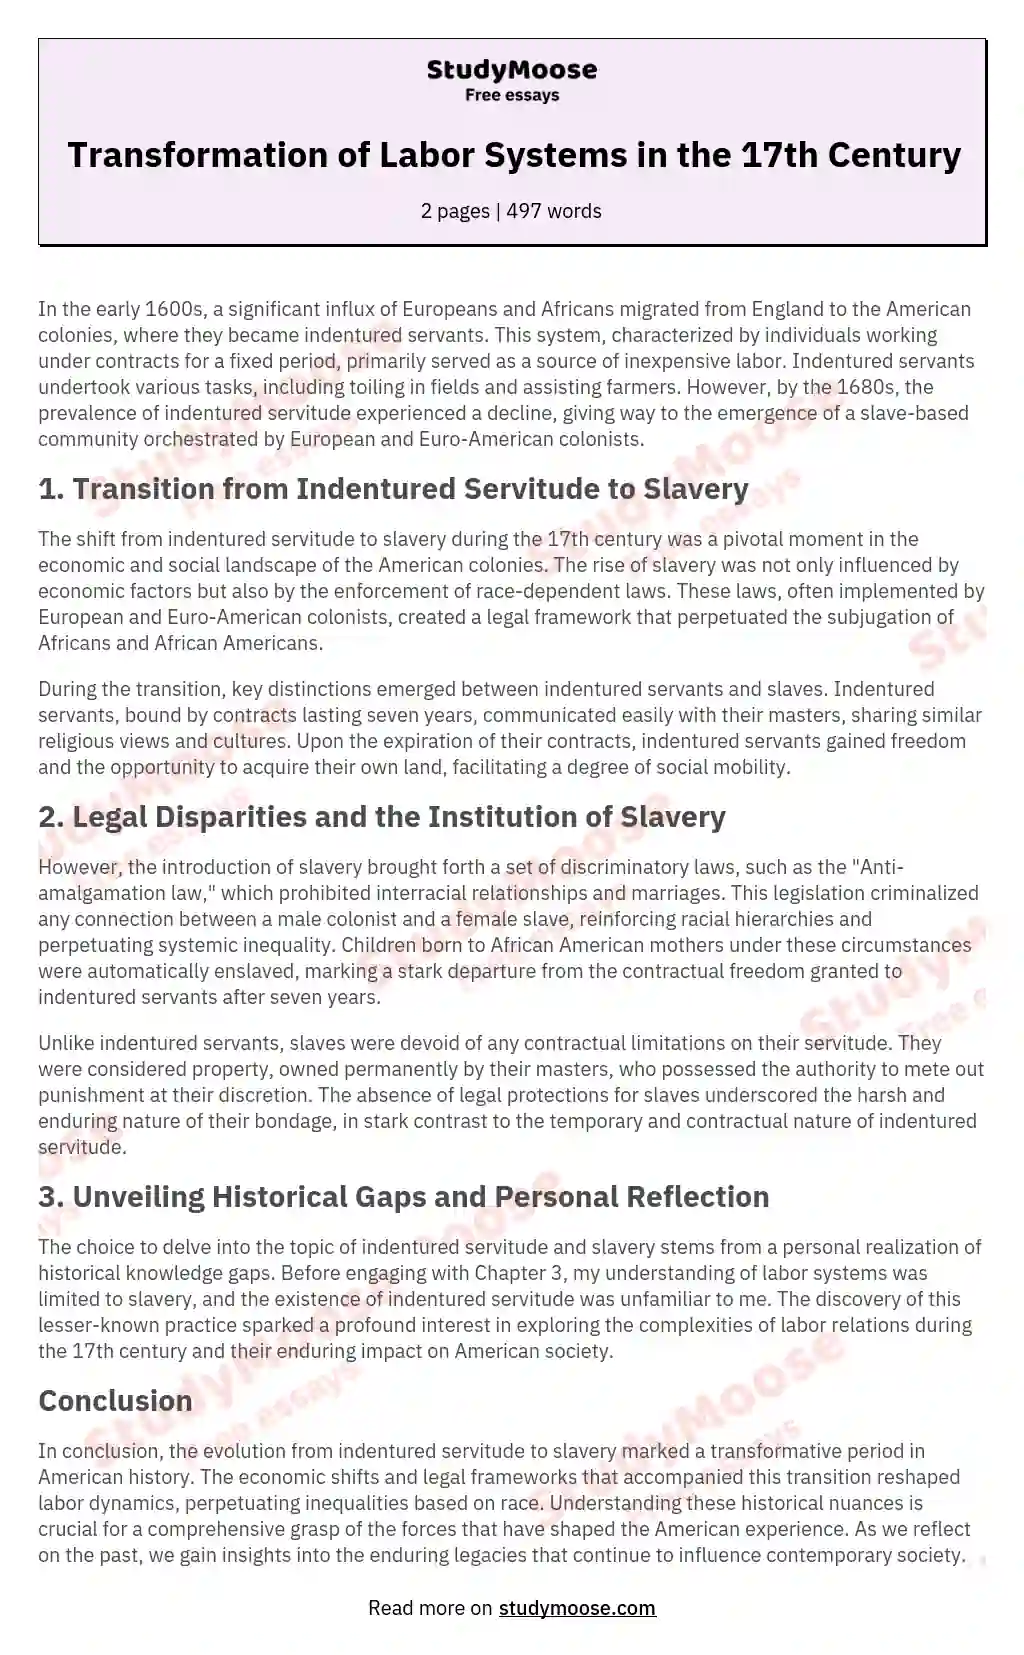 Differences Between Slavery and Indentured Servants